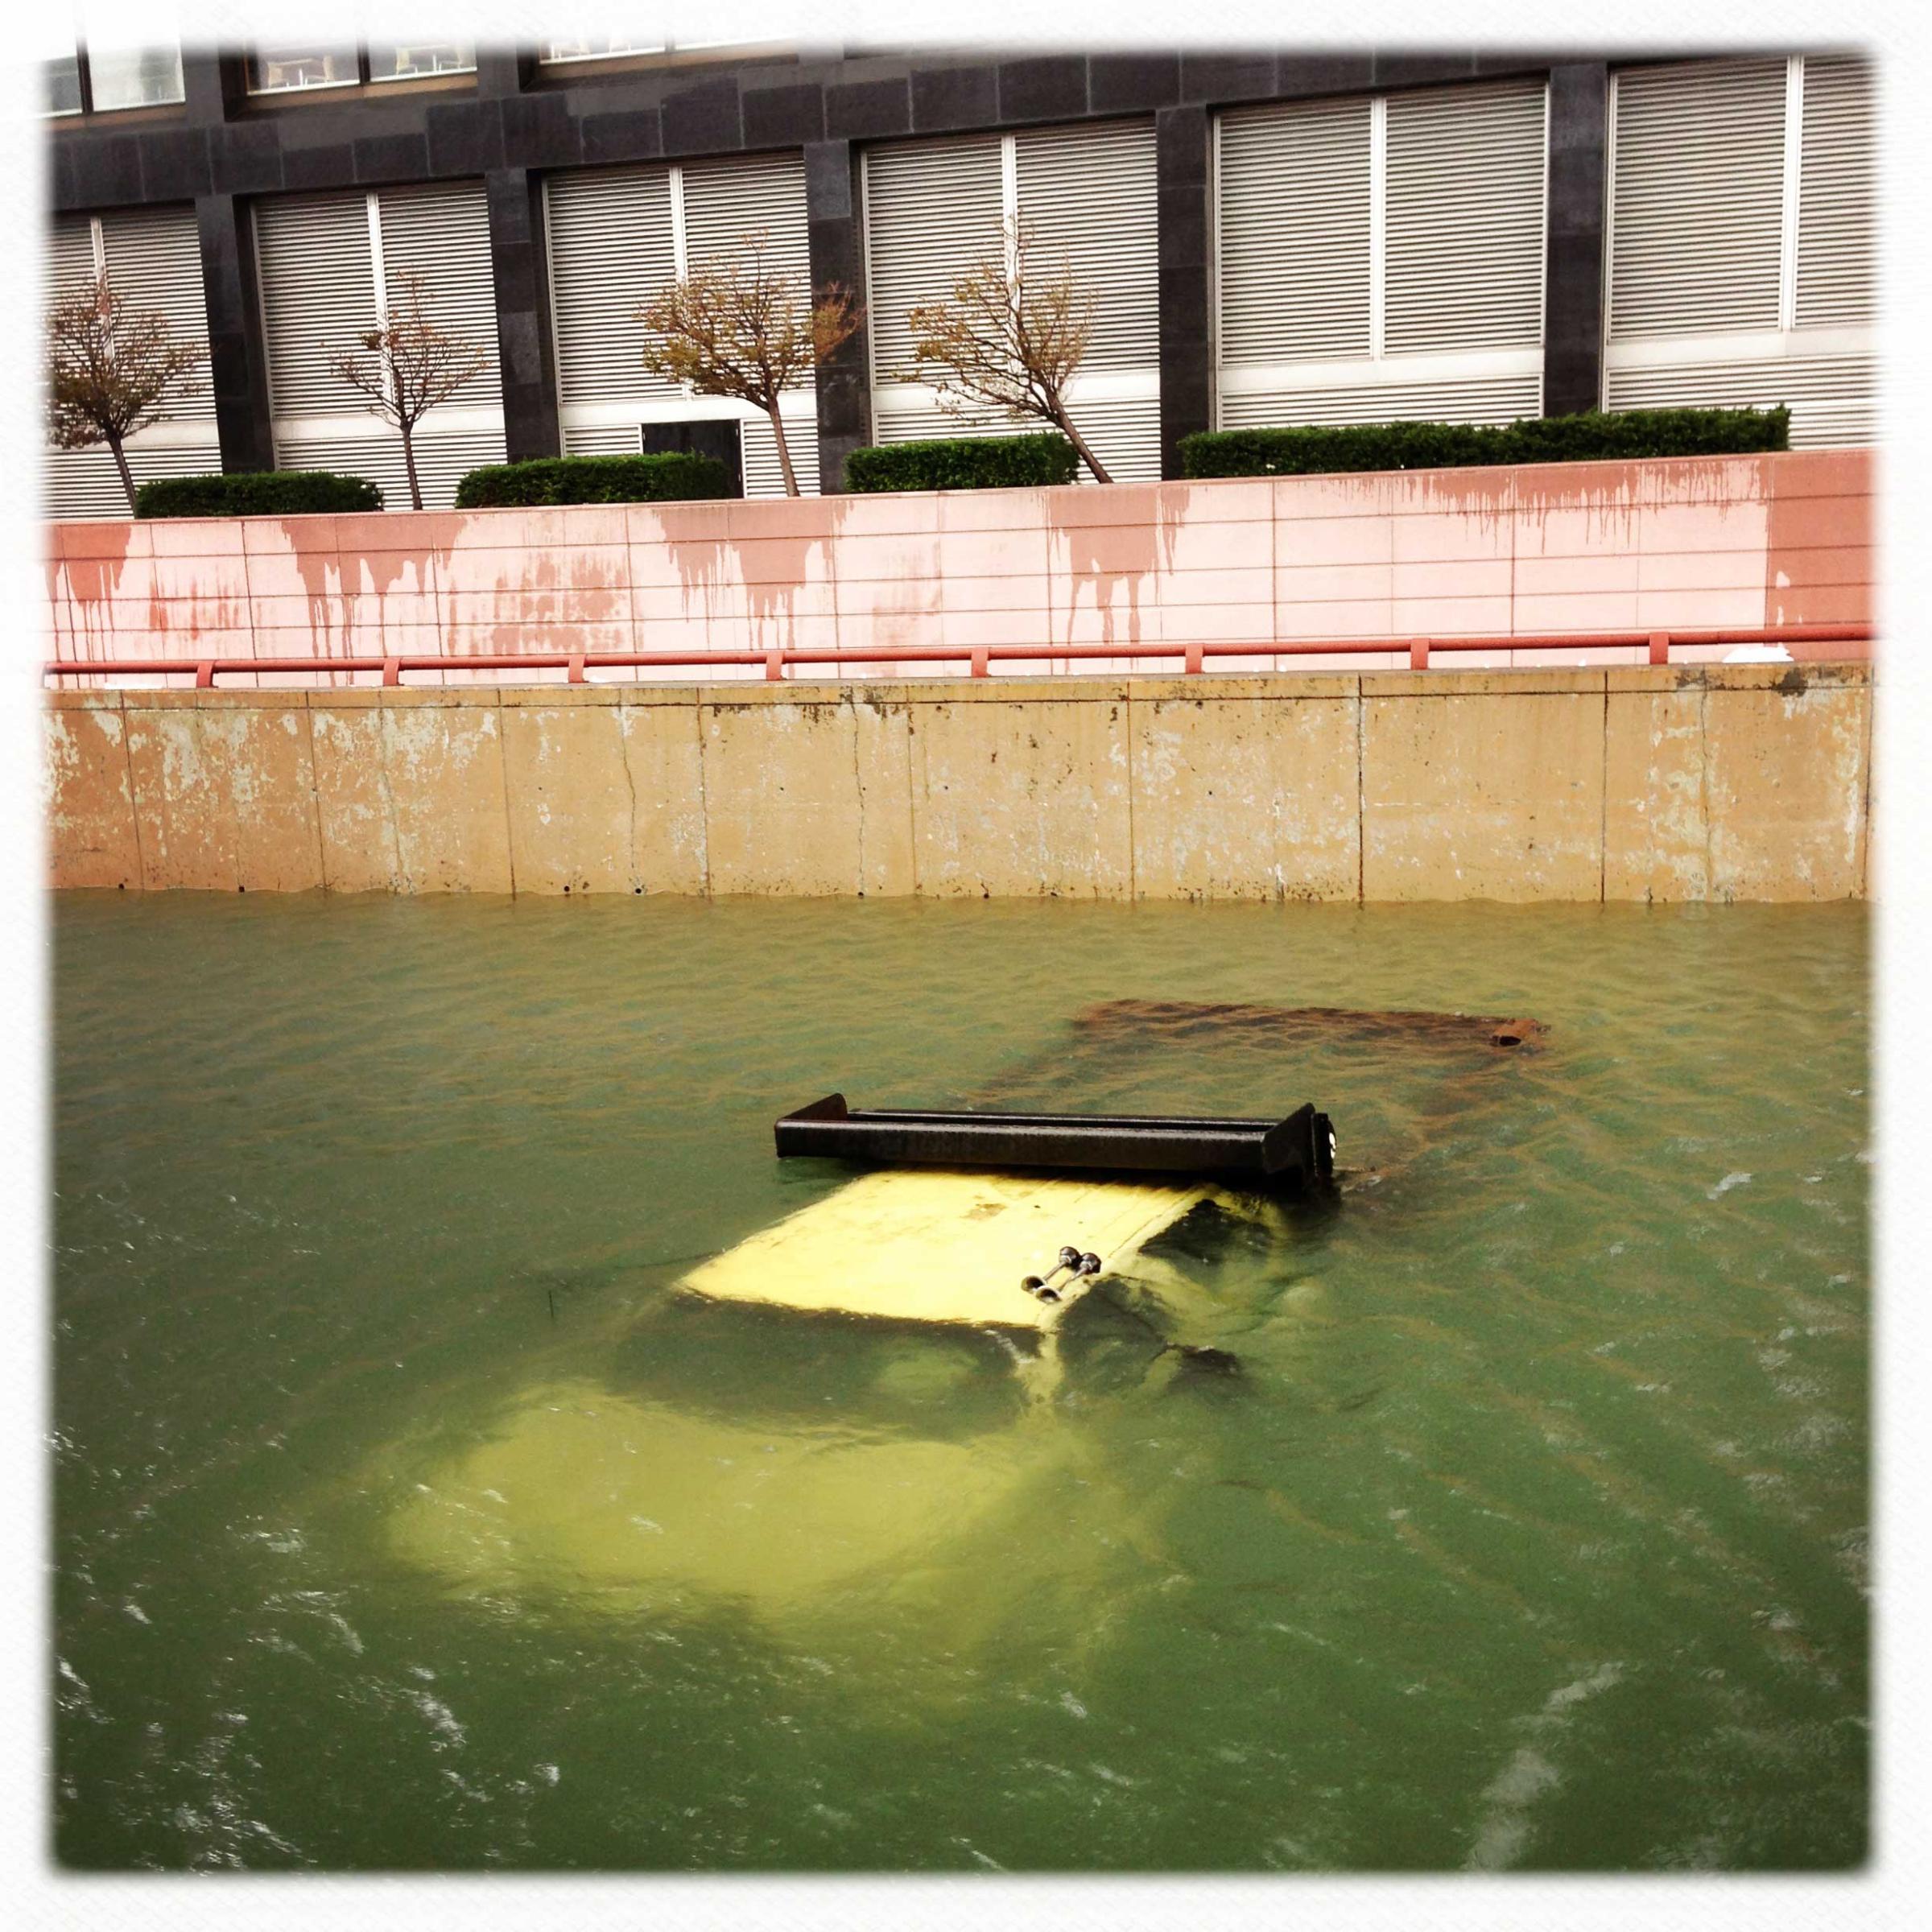 A truck submerged in water at the entrance to the Brooklyn-Battery tunnel in Lower Manhattan